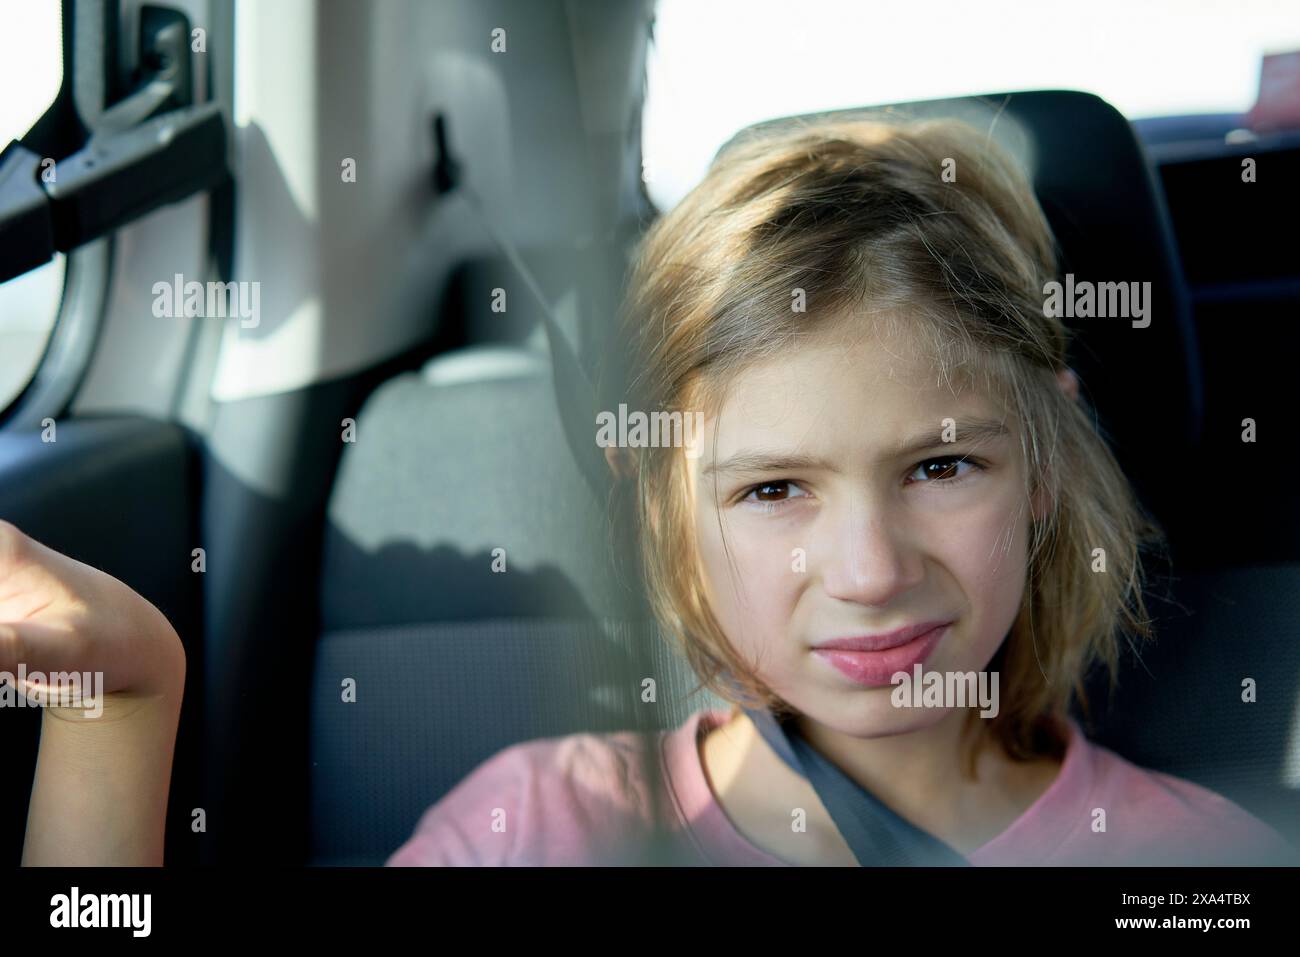 Young girl smiling gently while seated in a car wearing a seatbelt, with sunlight filtering through the window. Stock Photo